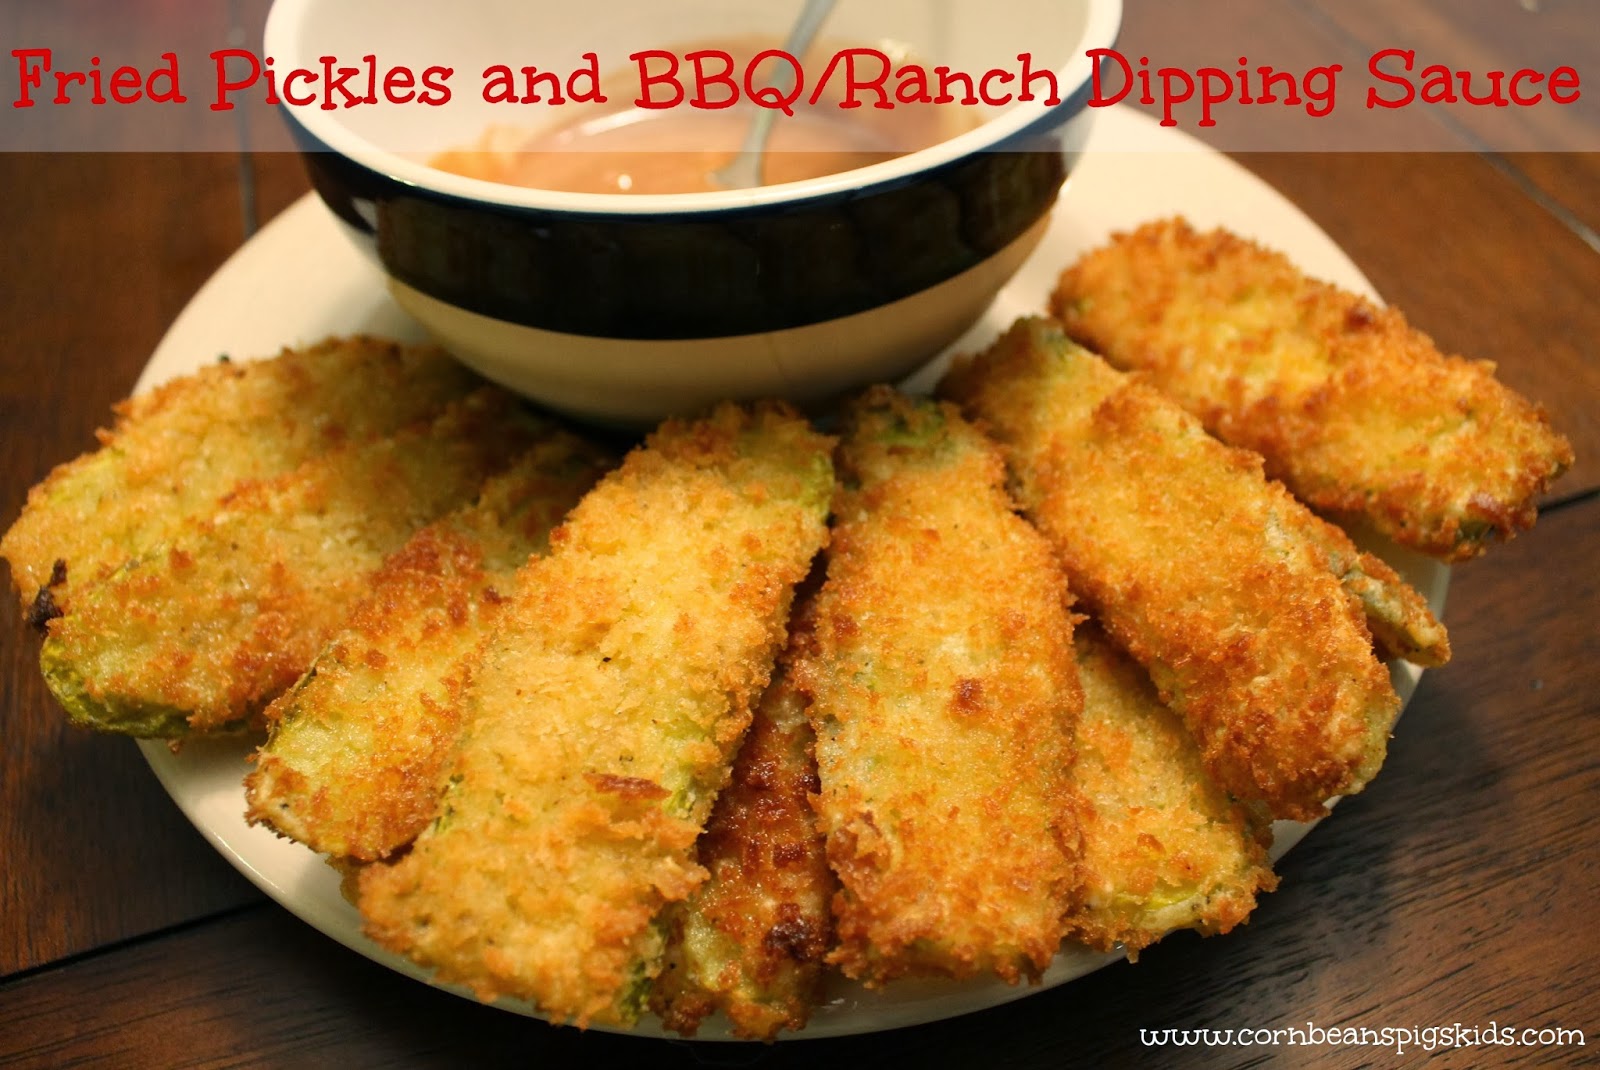 Fried Pickles and BBQ/Ranch Dipping Sauce